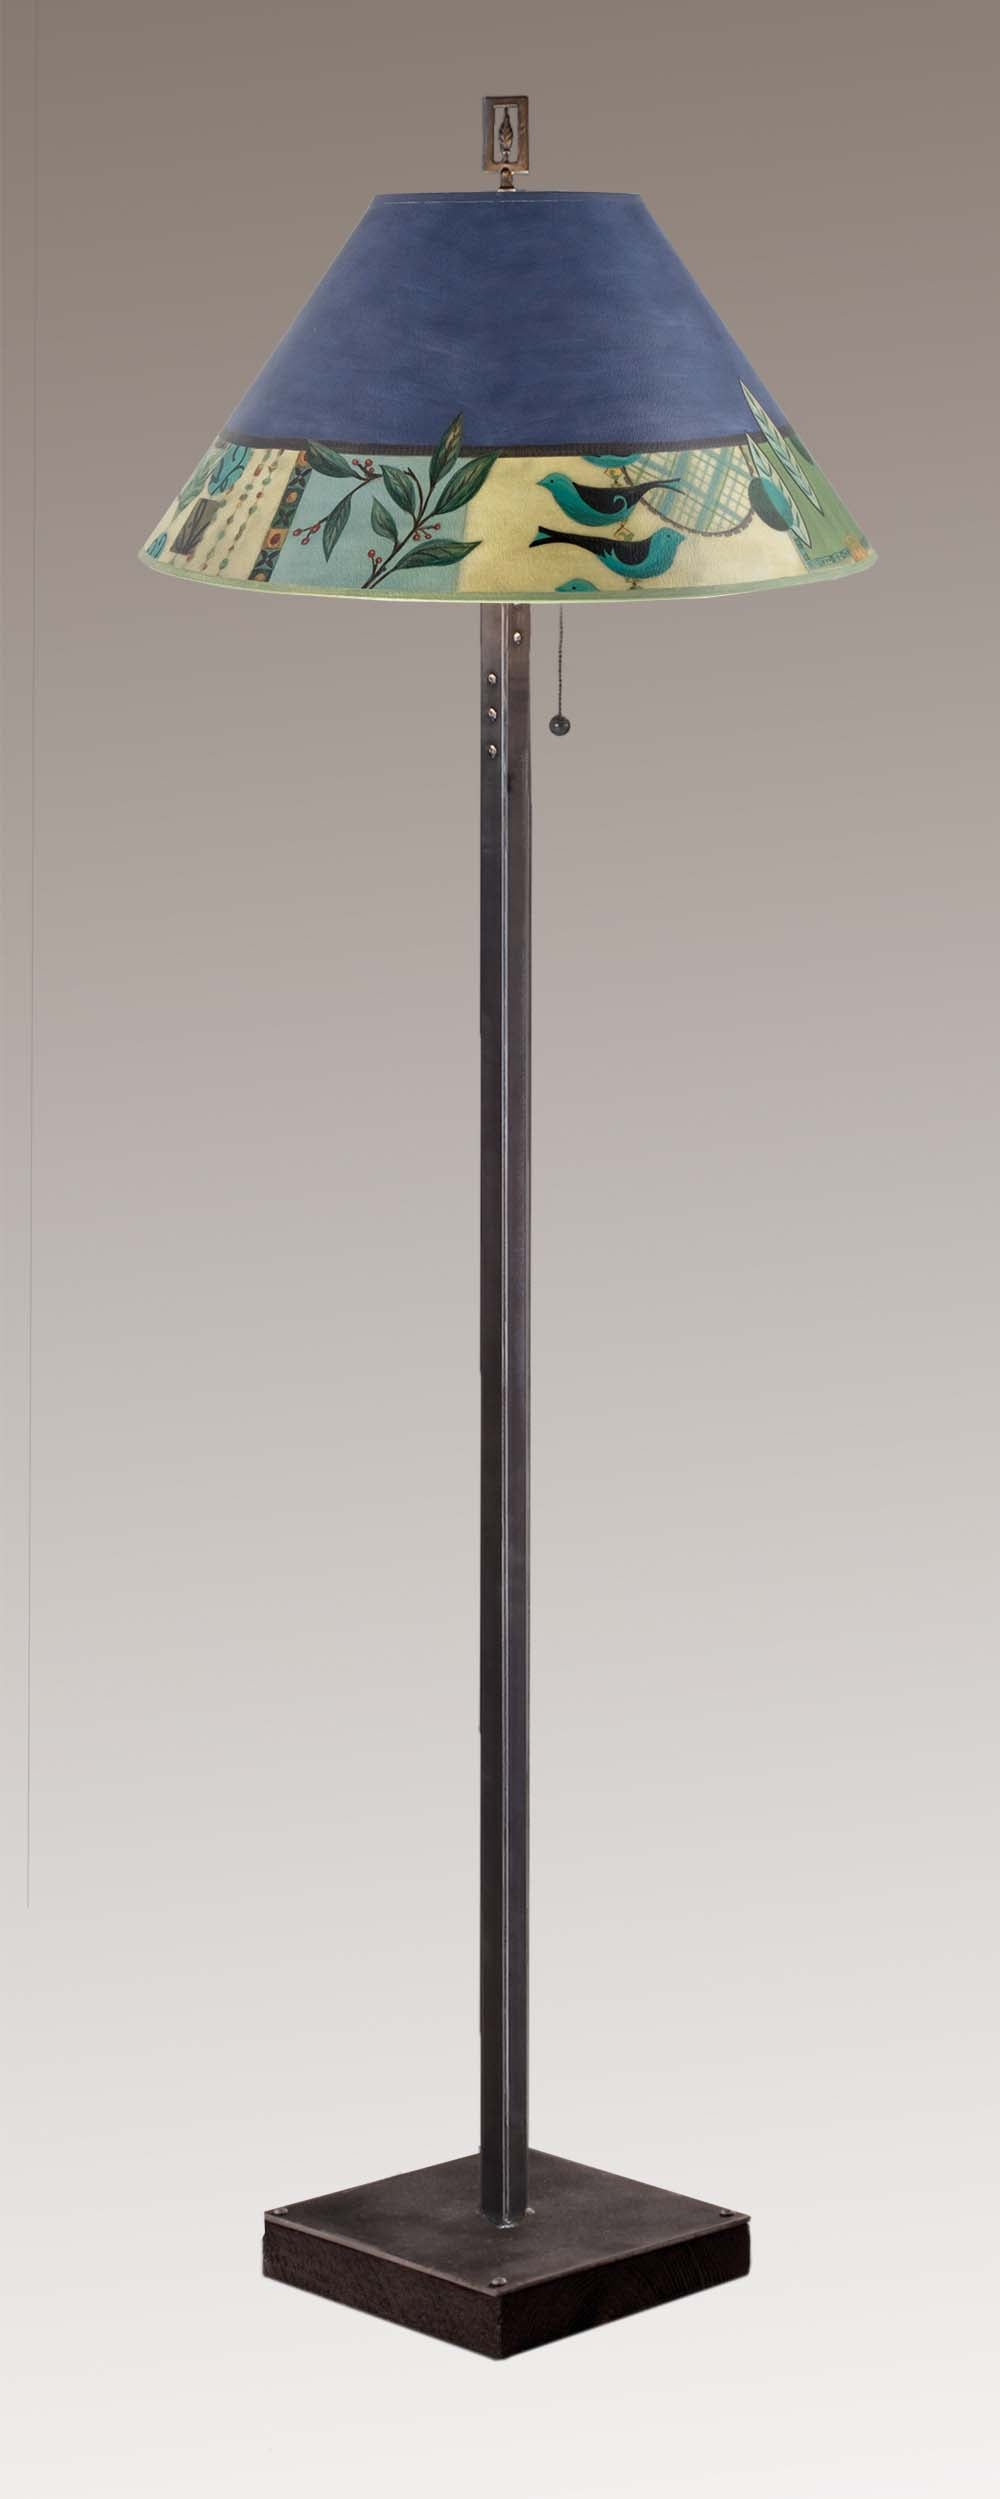 Janna Ugone &amp; Co Floor Lamps Steel Floor Lamp on  Reclaimed Wood with Large Conical Shade in New Capri Periwinkle